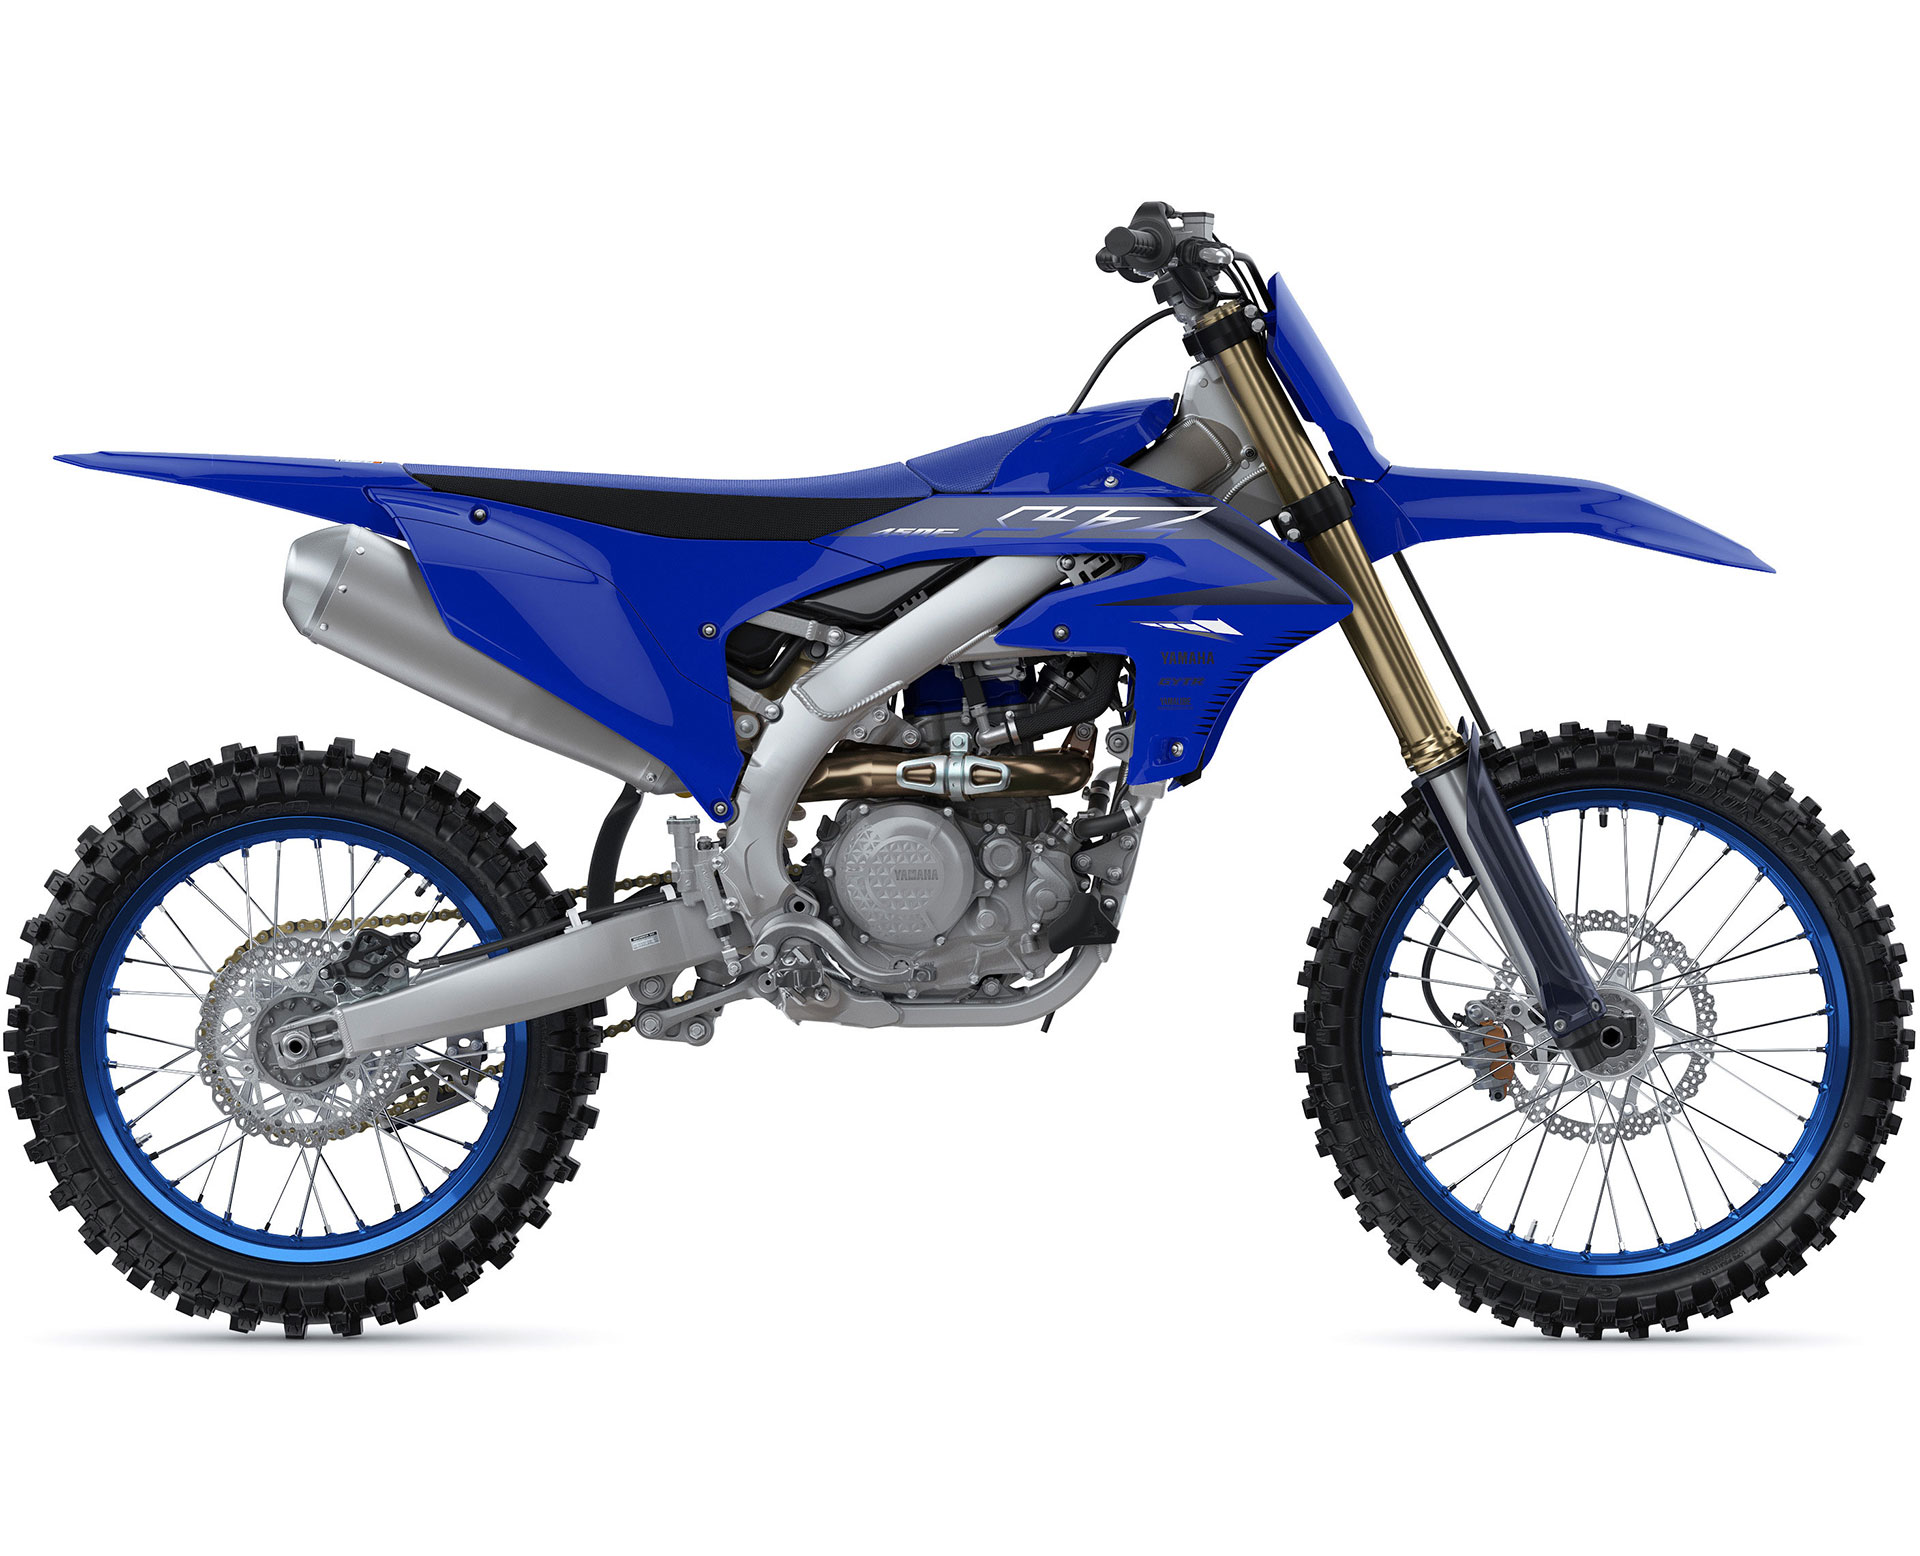 Thumbnail of your customized 2023 YZ450F